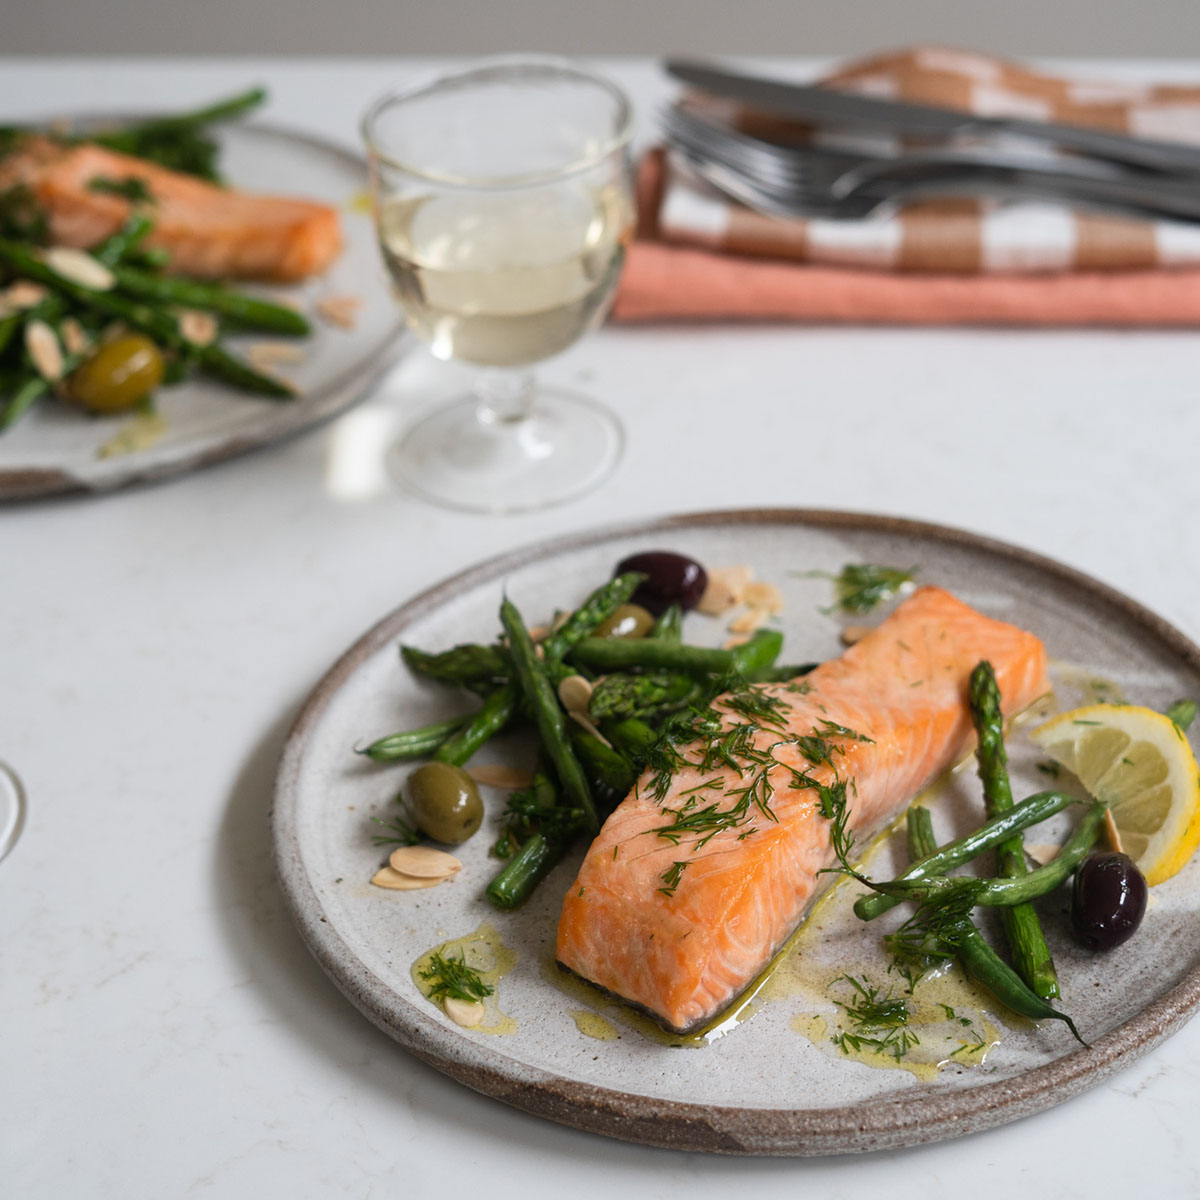 Roast Salmon with Green Vegetables